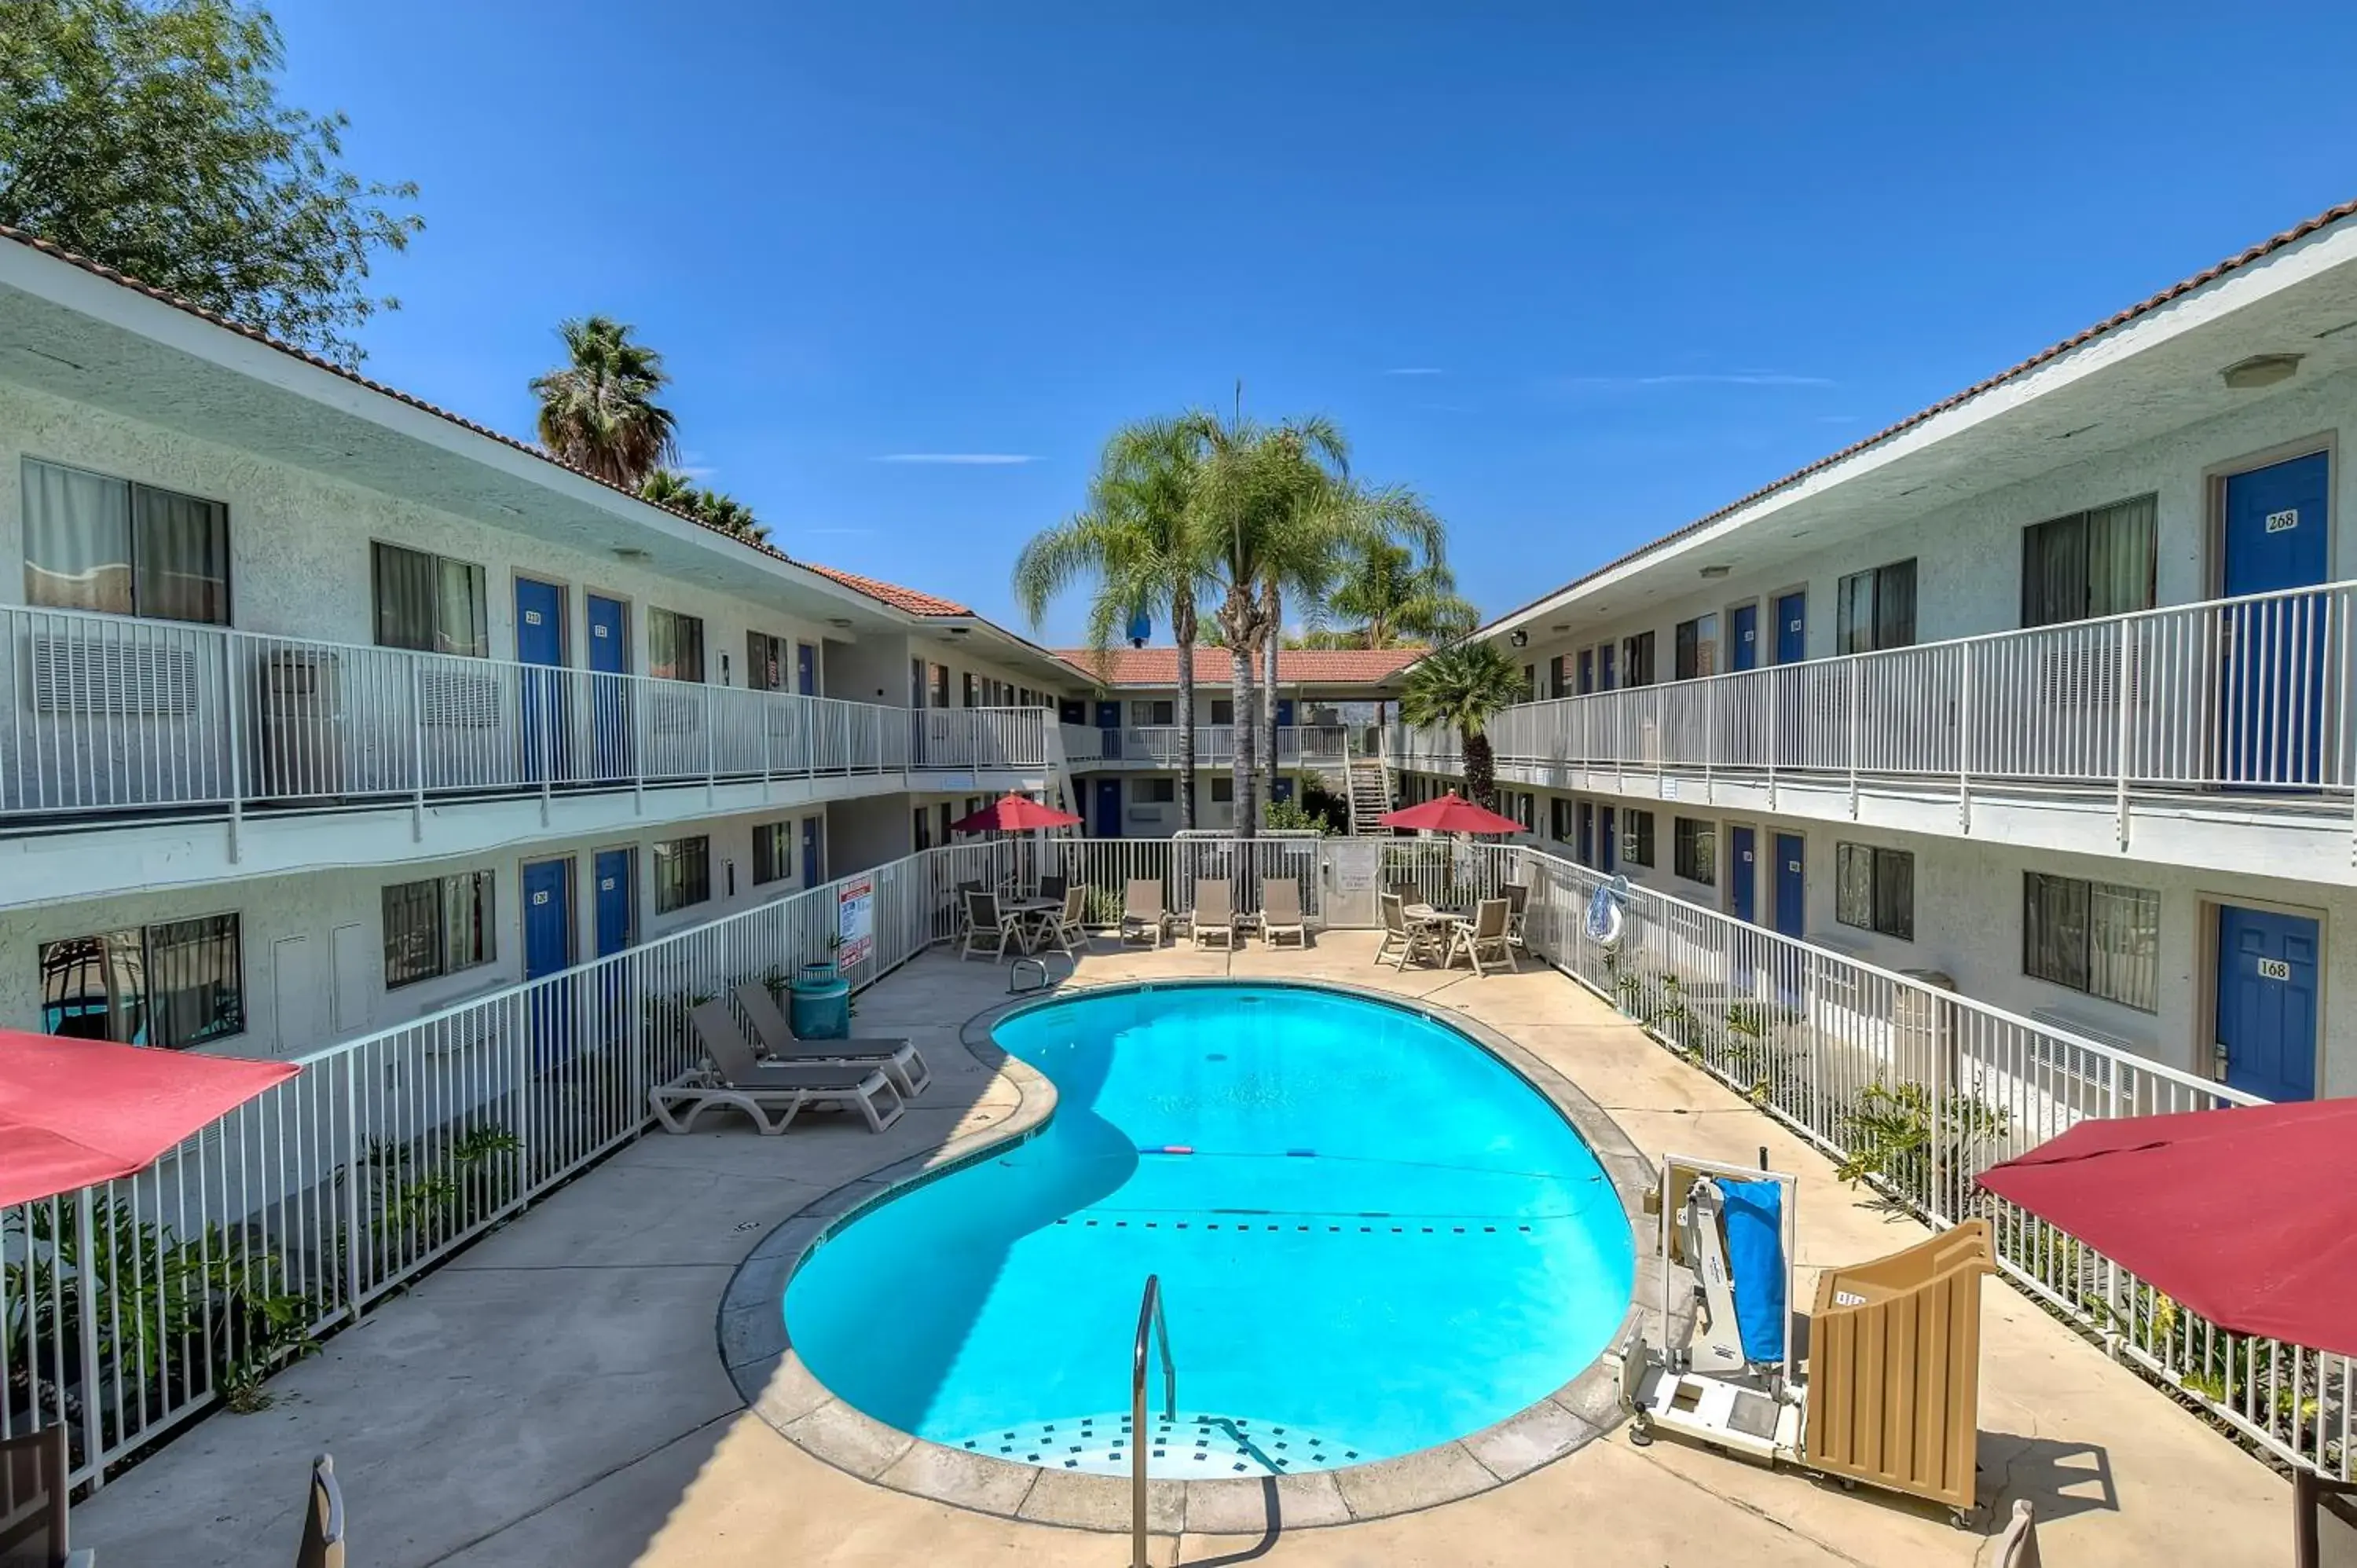 Property building, Pool View in Motel 6-Rowland Heights, CA - Los Angeles - Pomona